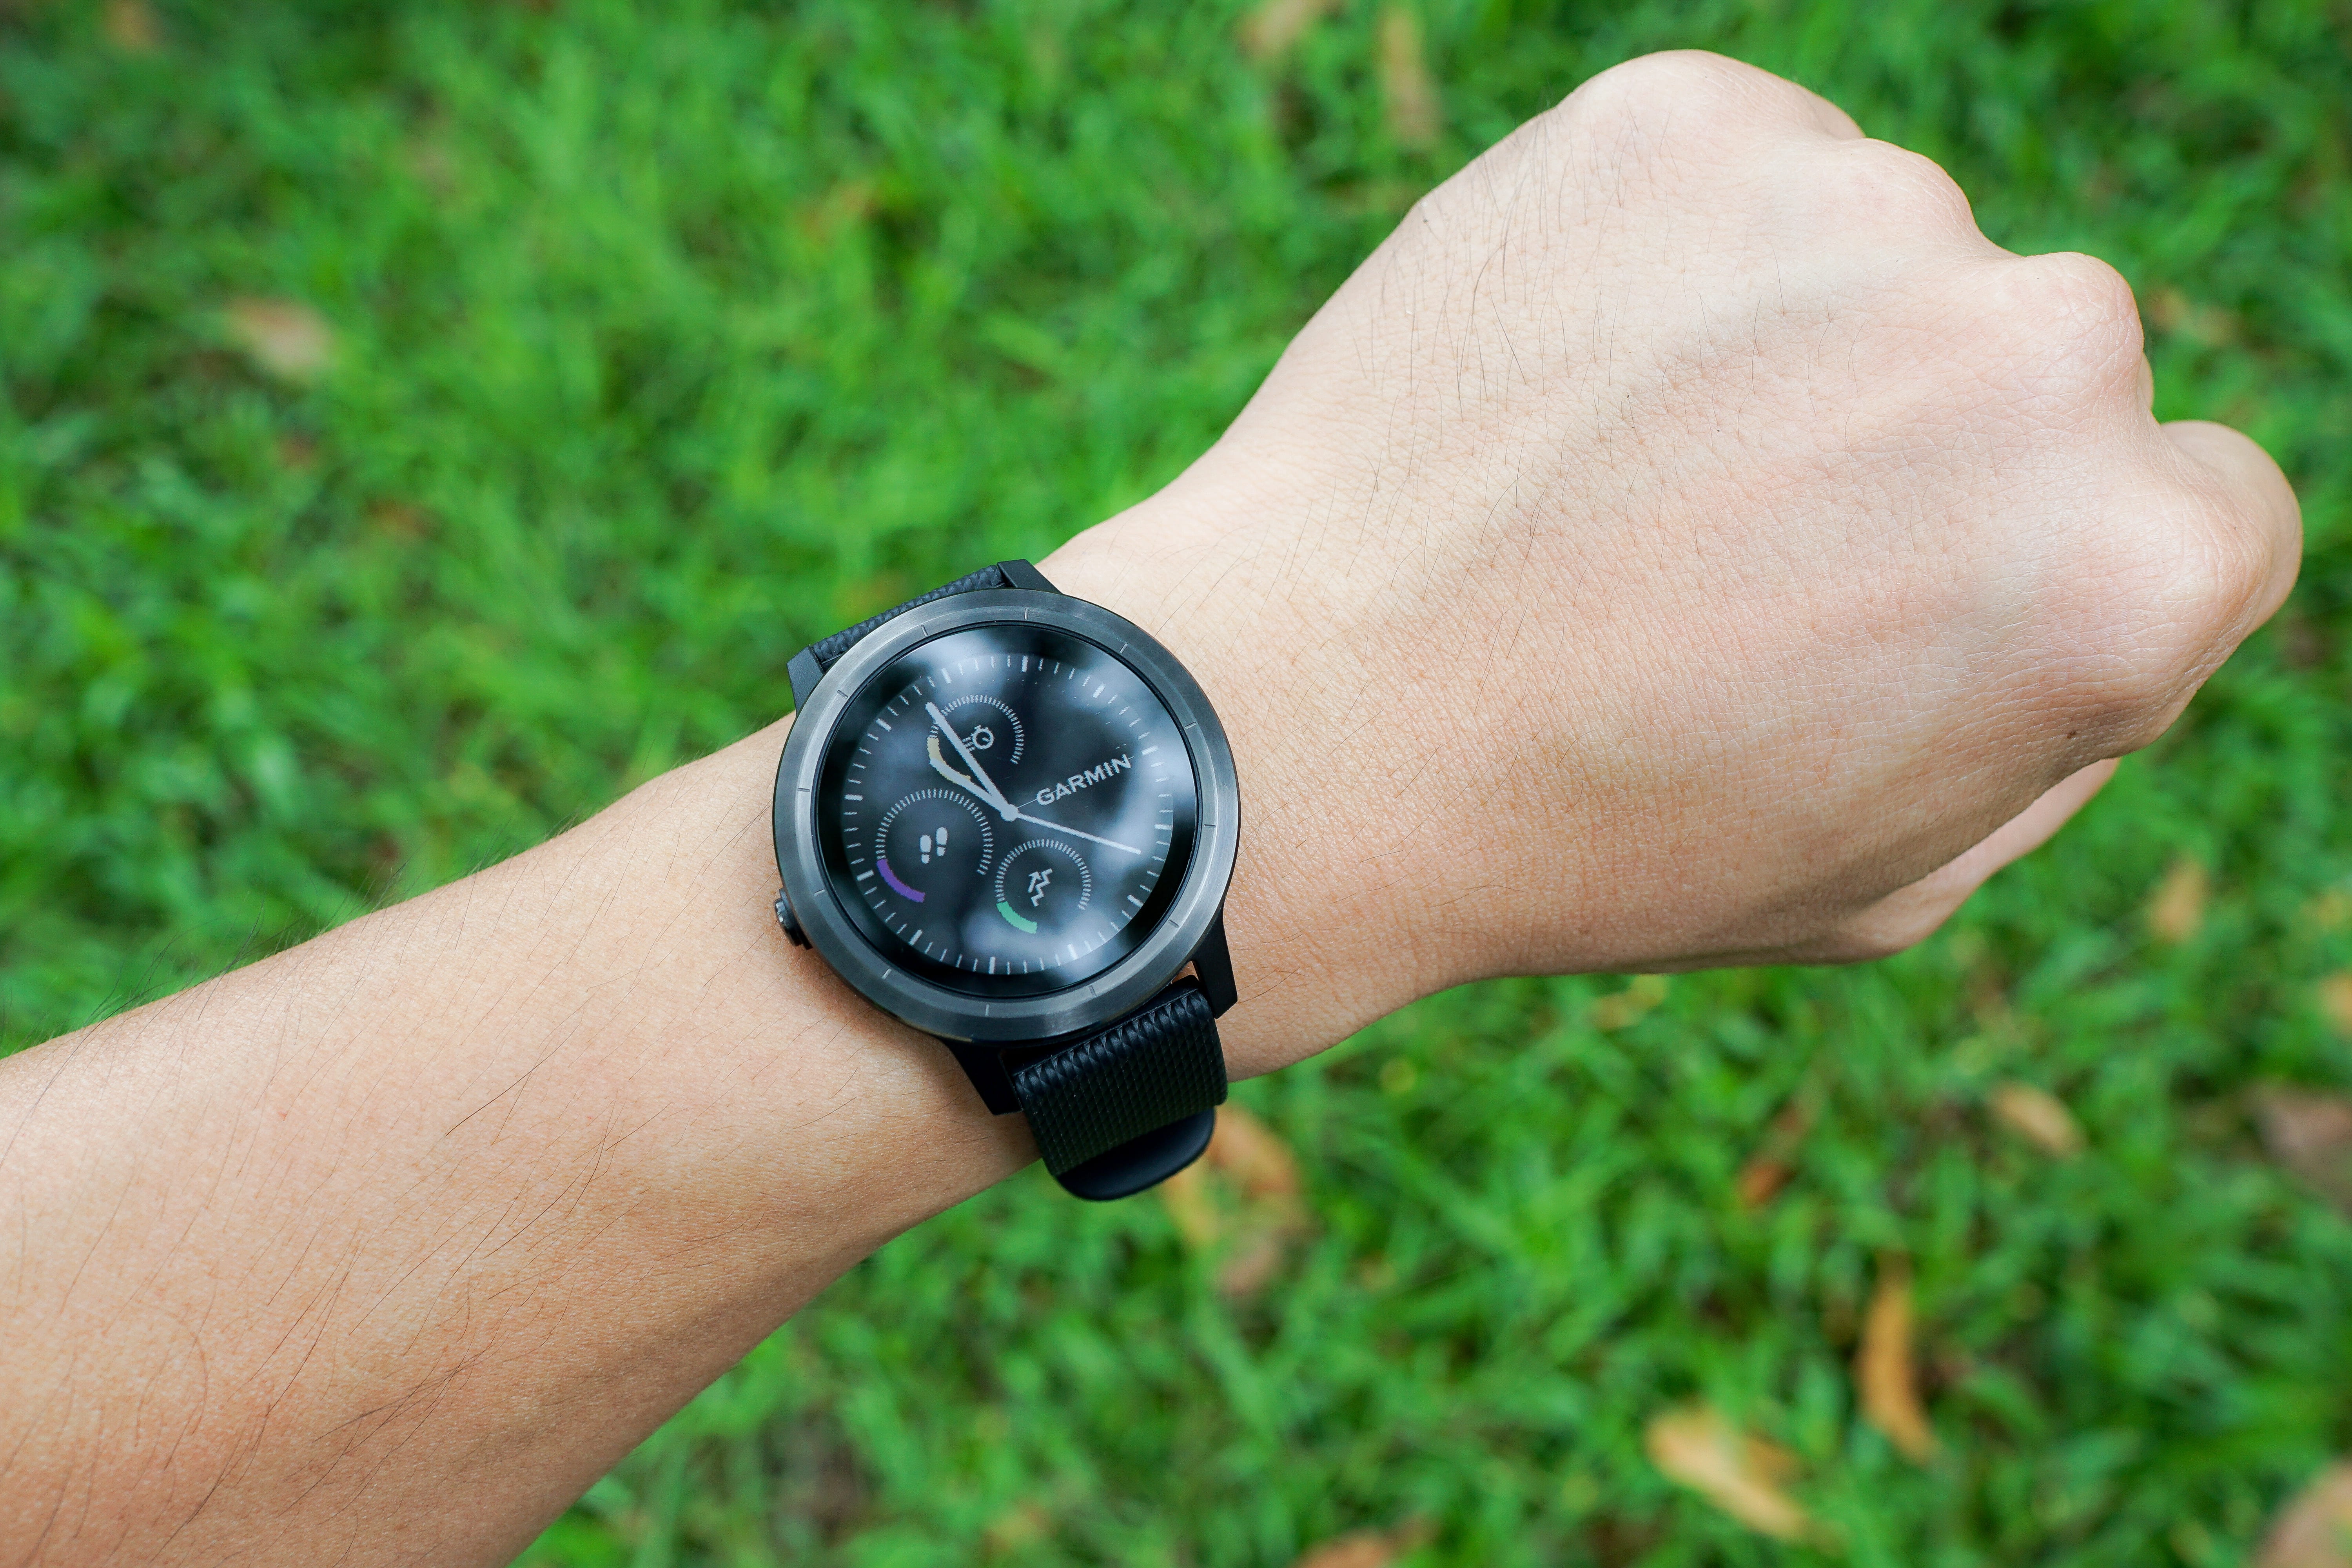 person wearing round black chronograph watch at 10:59, smartwatch